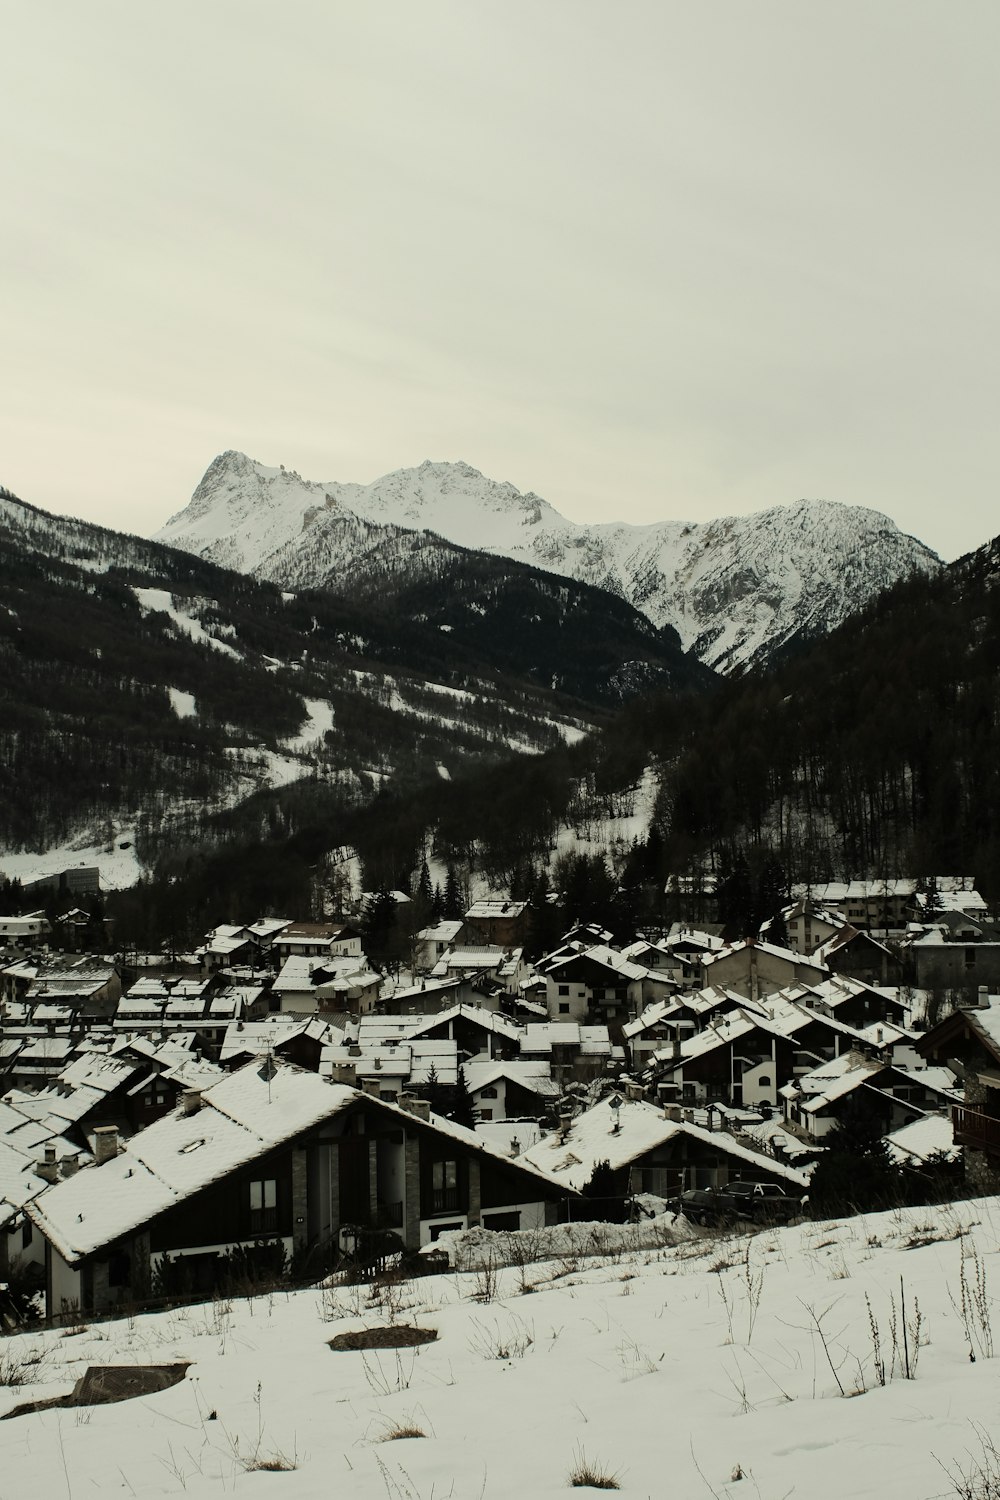 a snowy village with mountains in the background